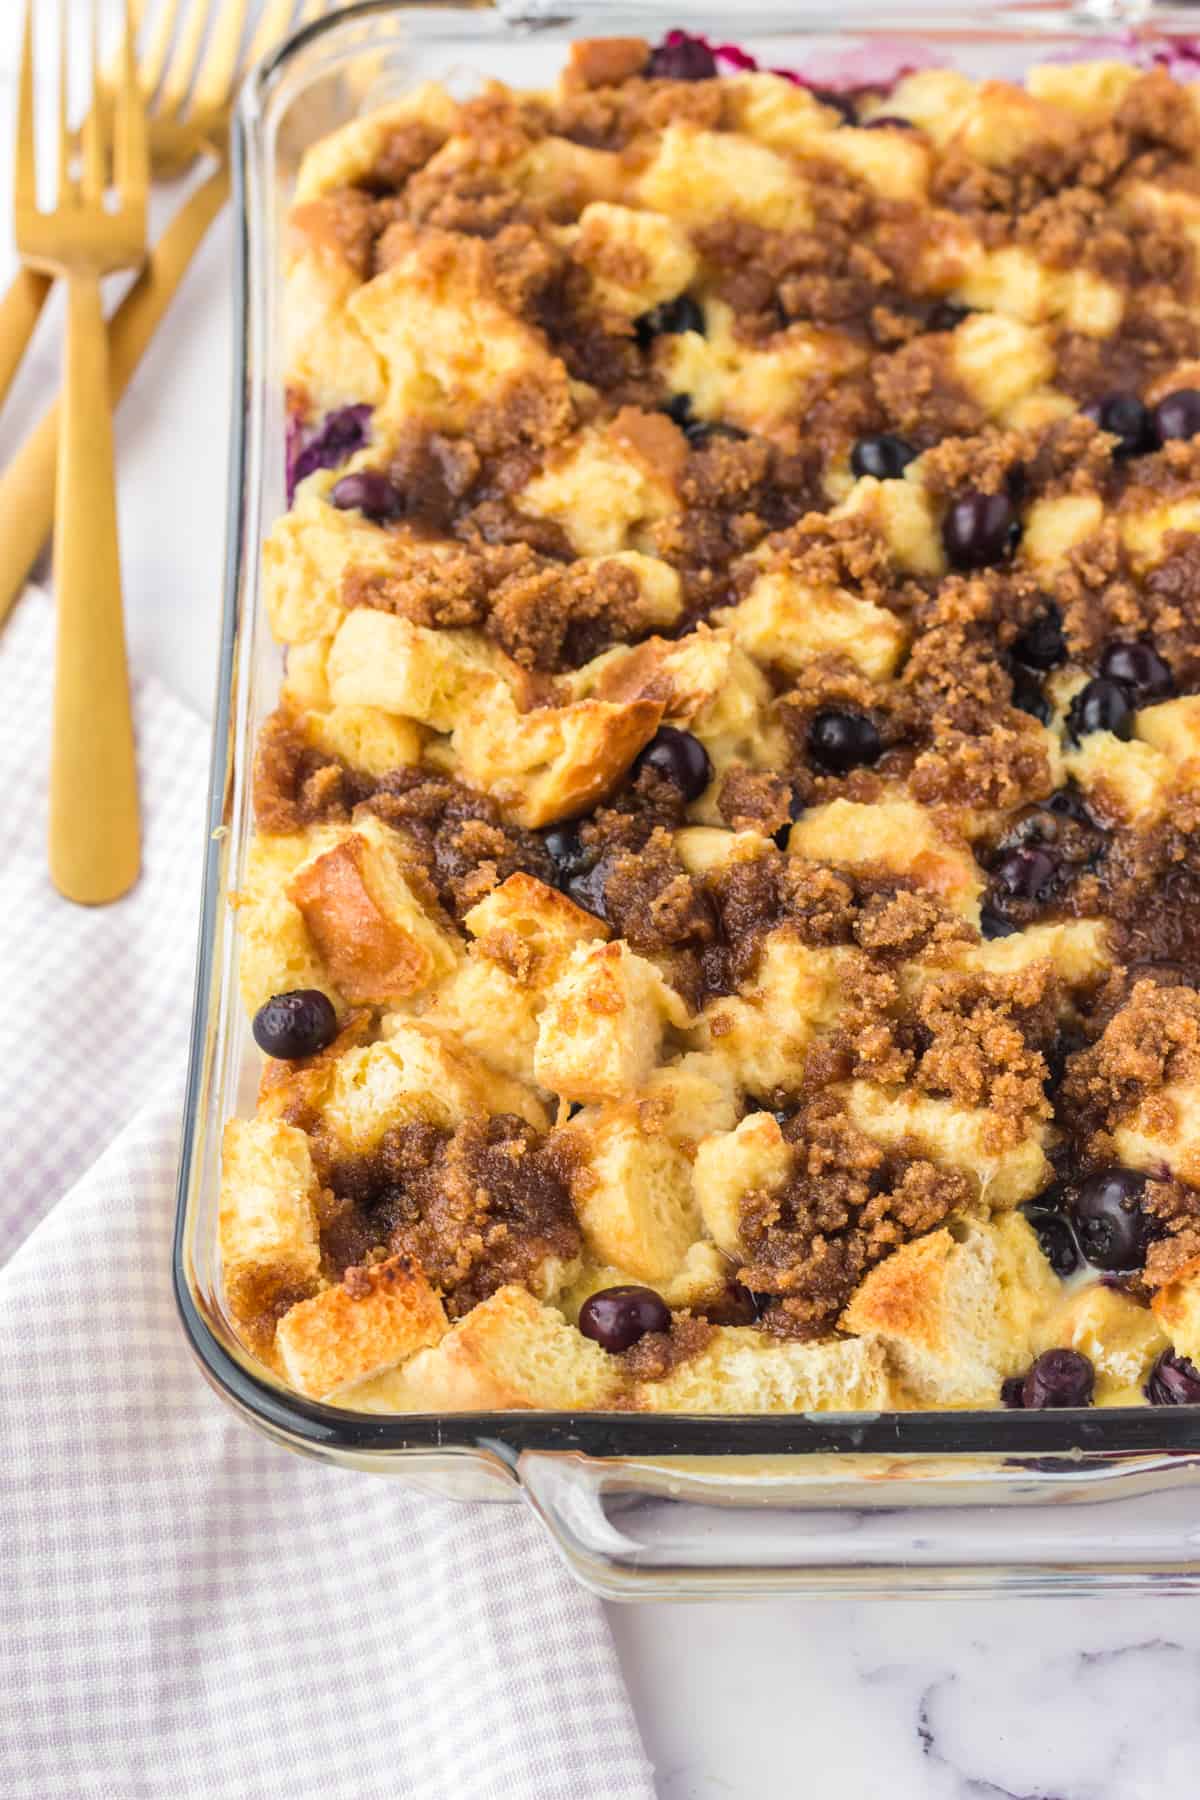 Overnight blueberry french toast casserole in 9 x 13 baking dish.